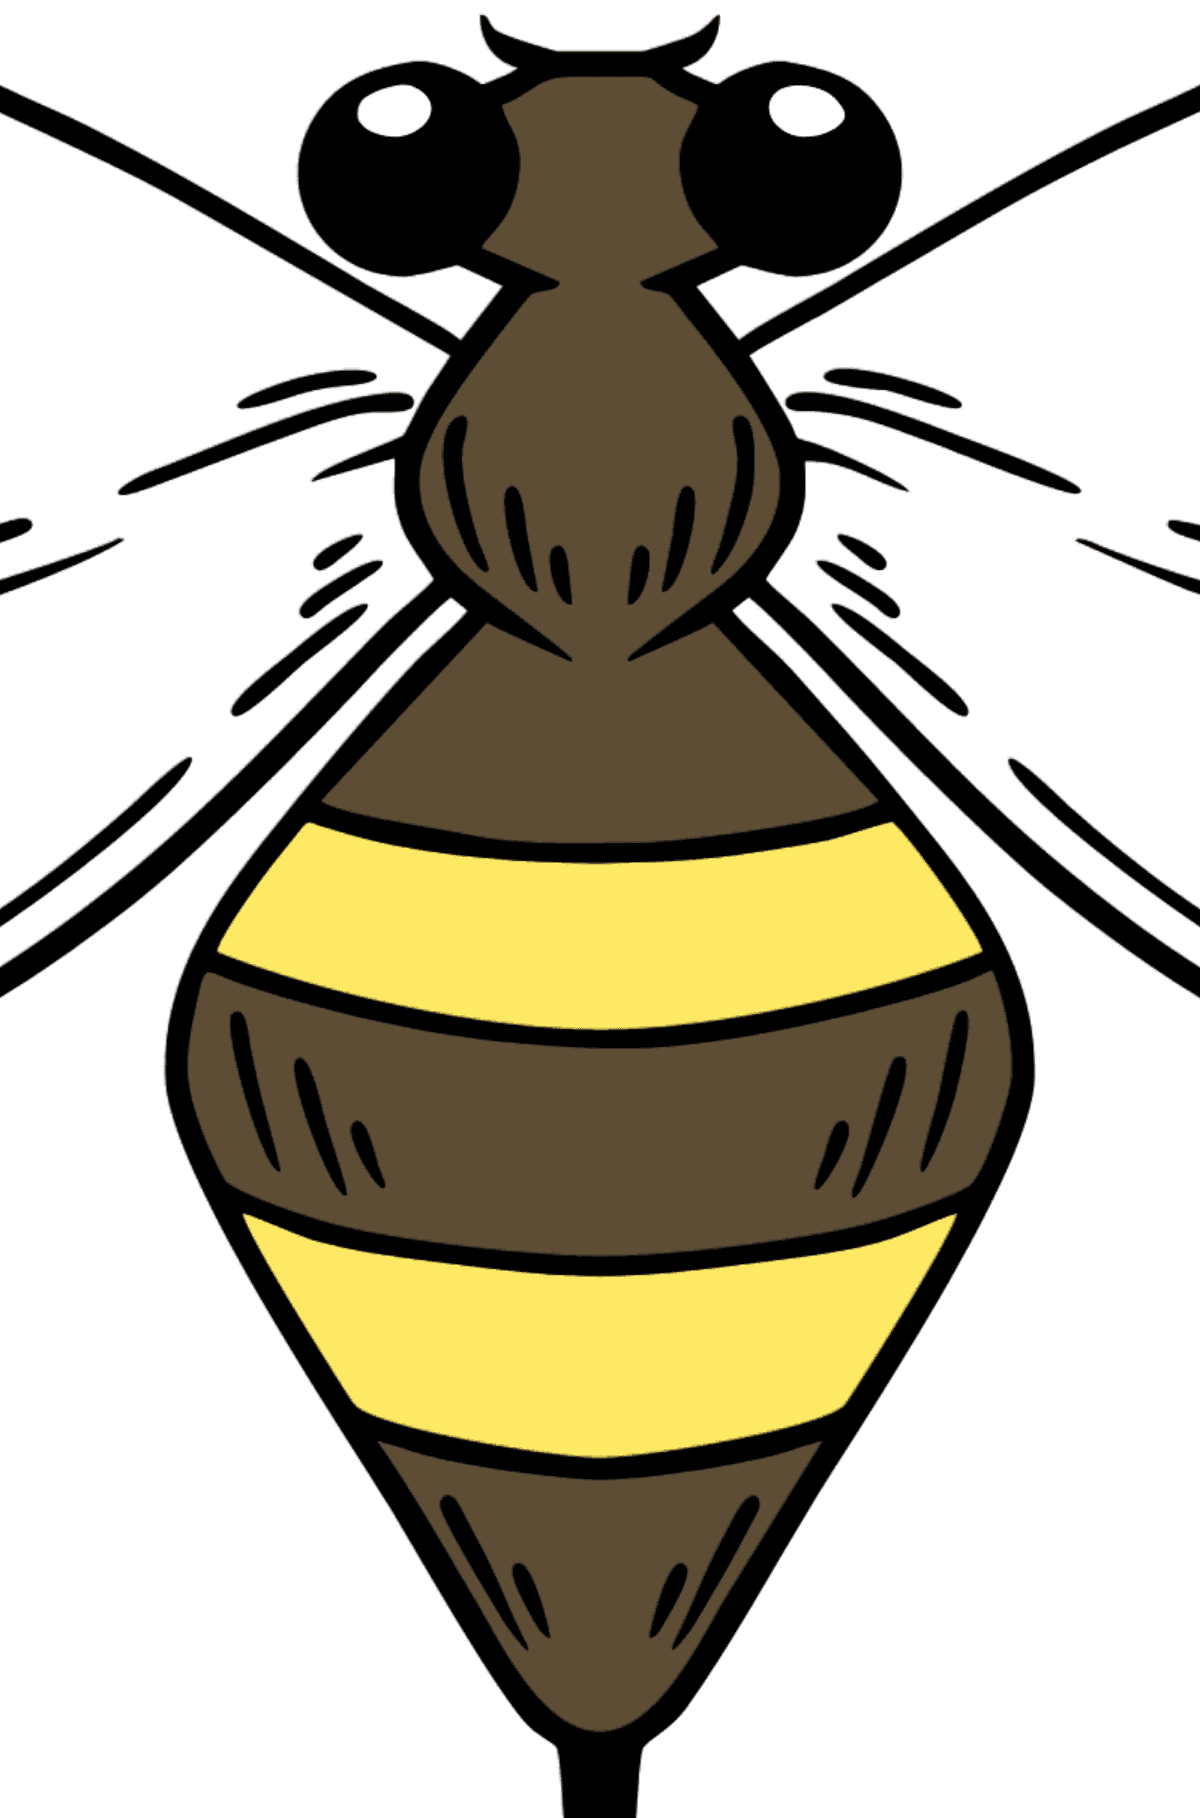 Wasp coloring page - Coloring by Symbols for Kids